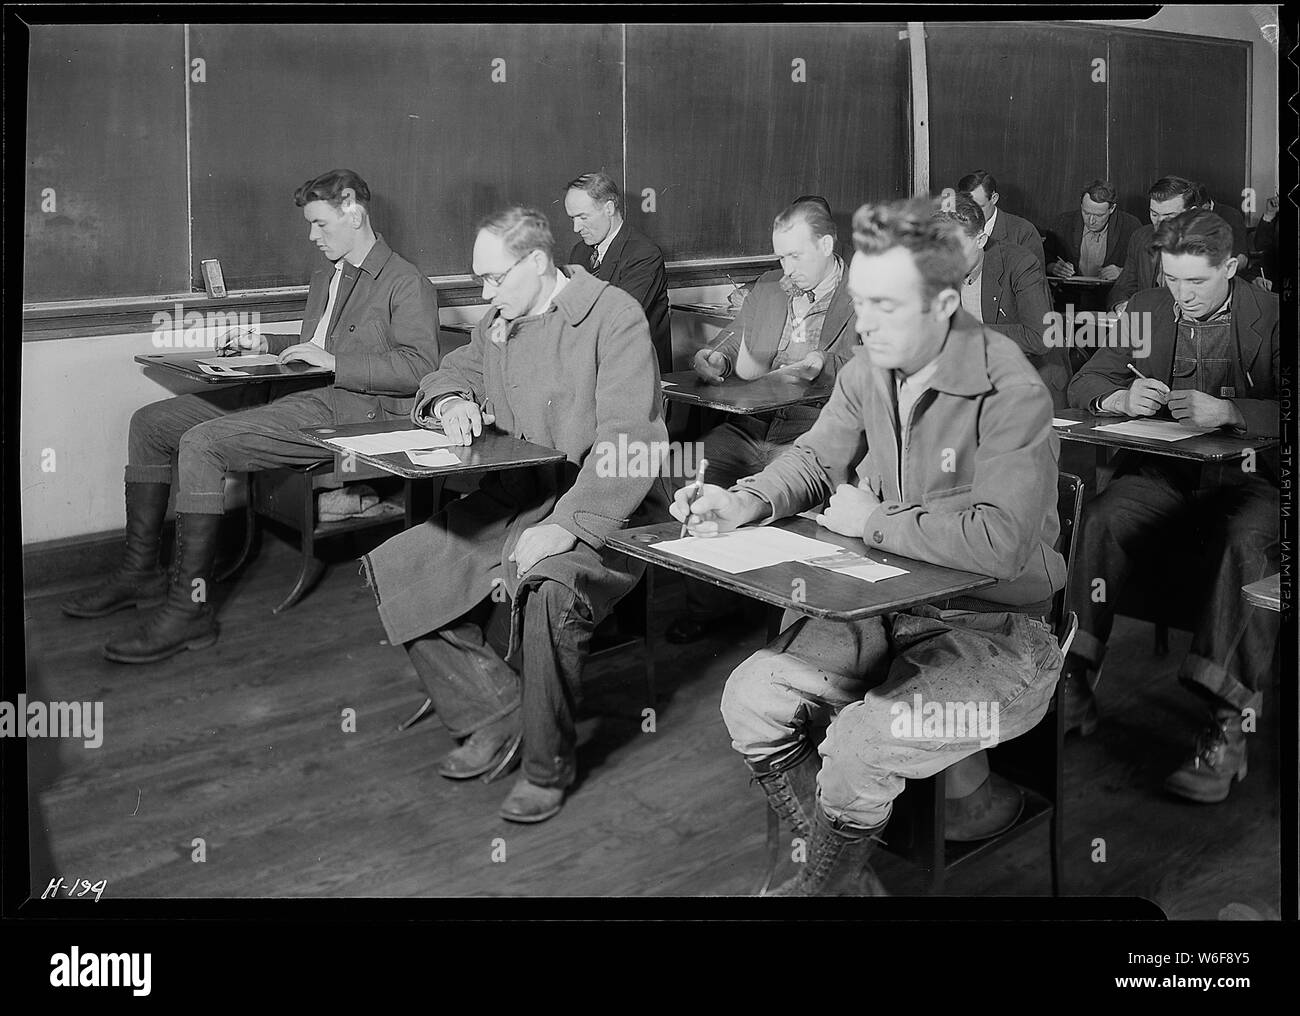 Applicants for skilled and unskilled laboring positions with the TVA being examined at High School building, Clinton, Tennessee. Mr. McDade, of TVA Division of Personnel, in charge. Stock Photo